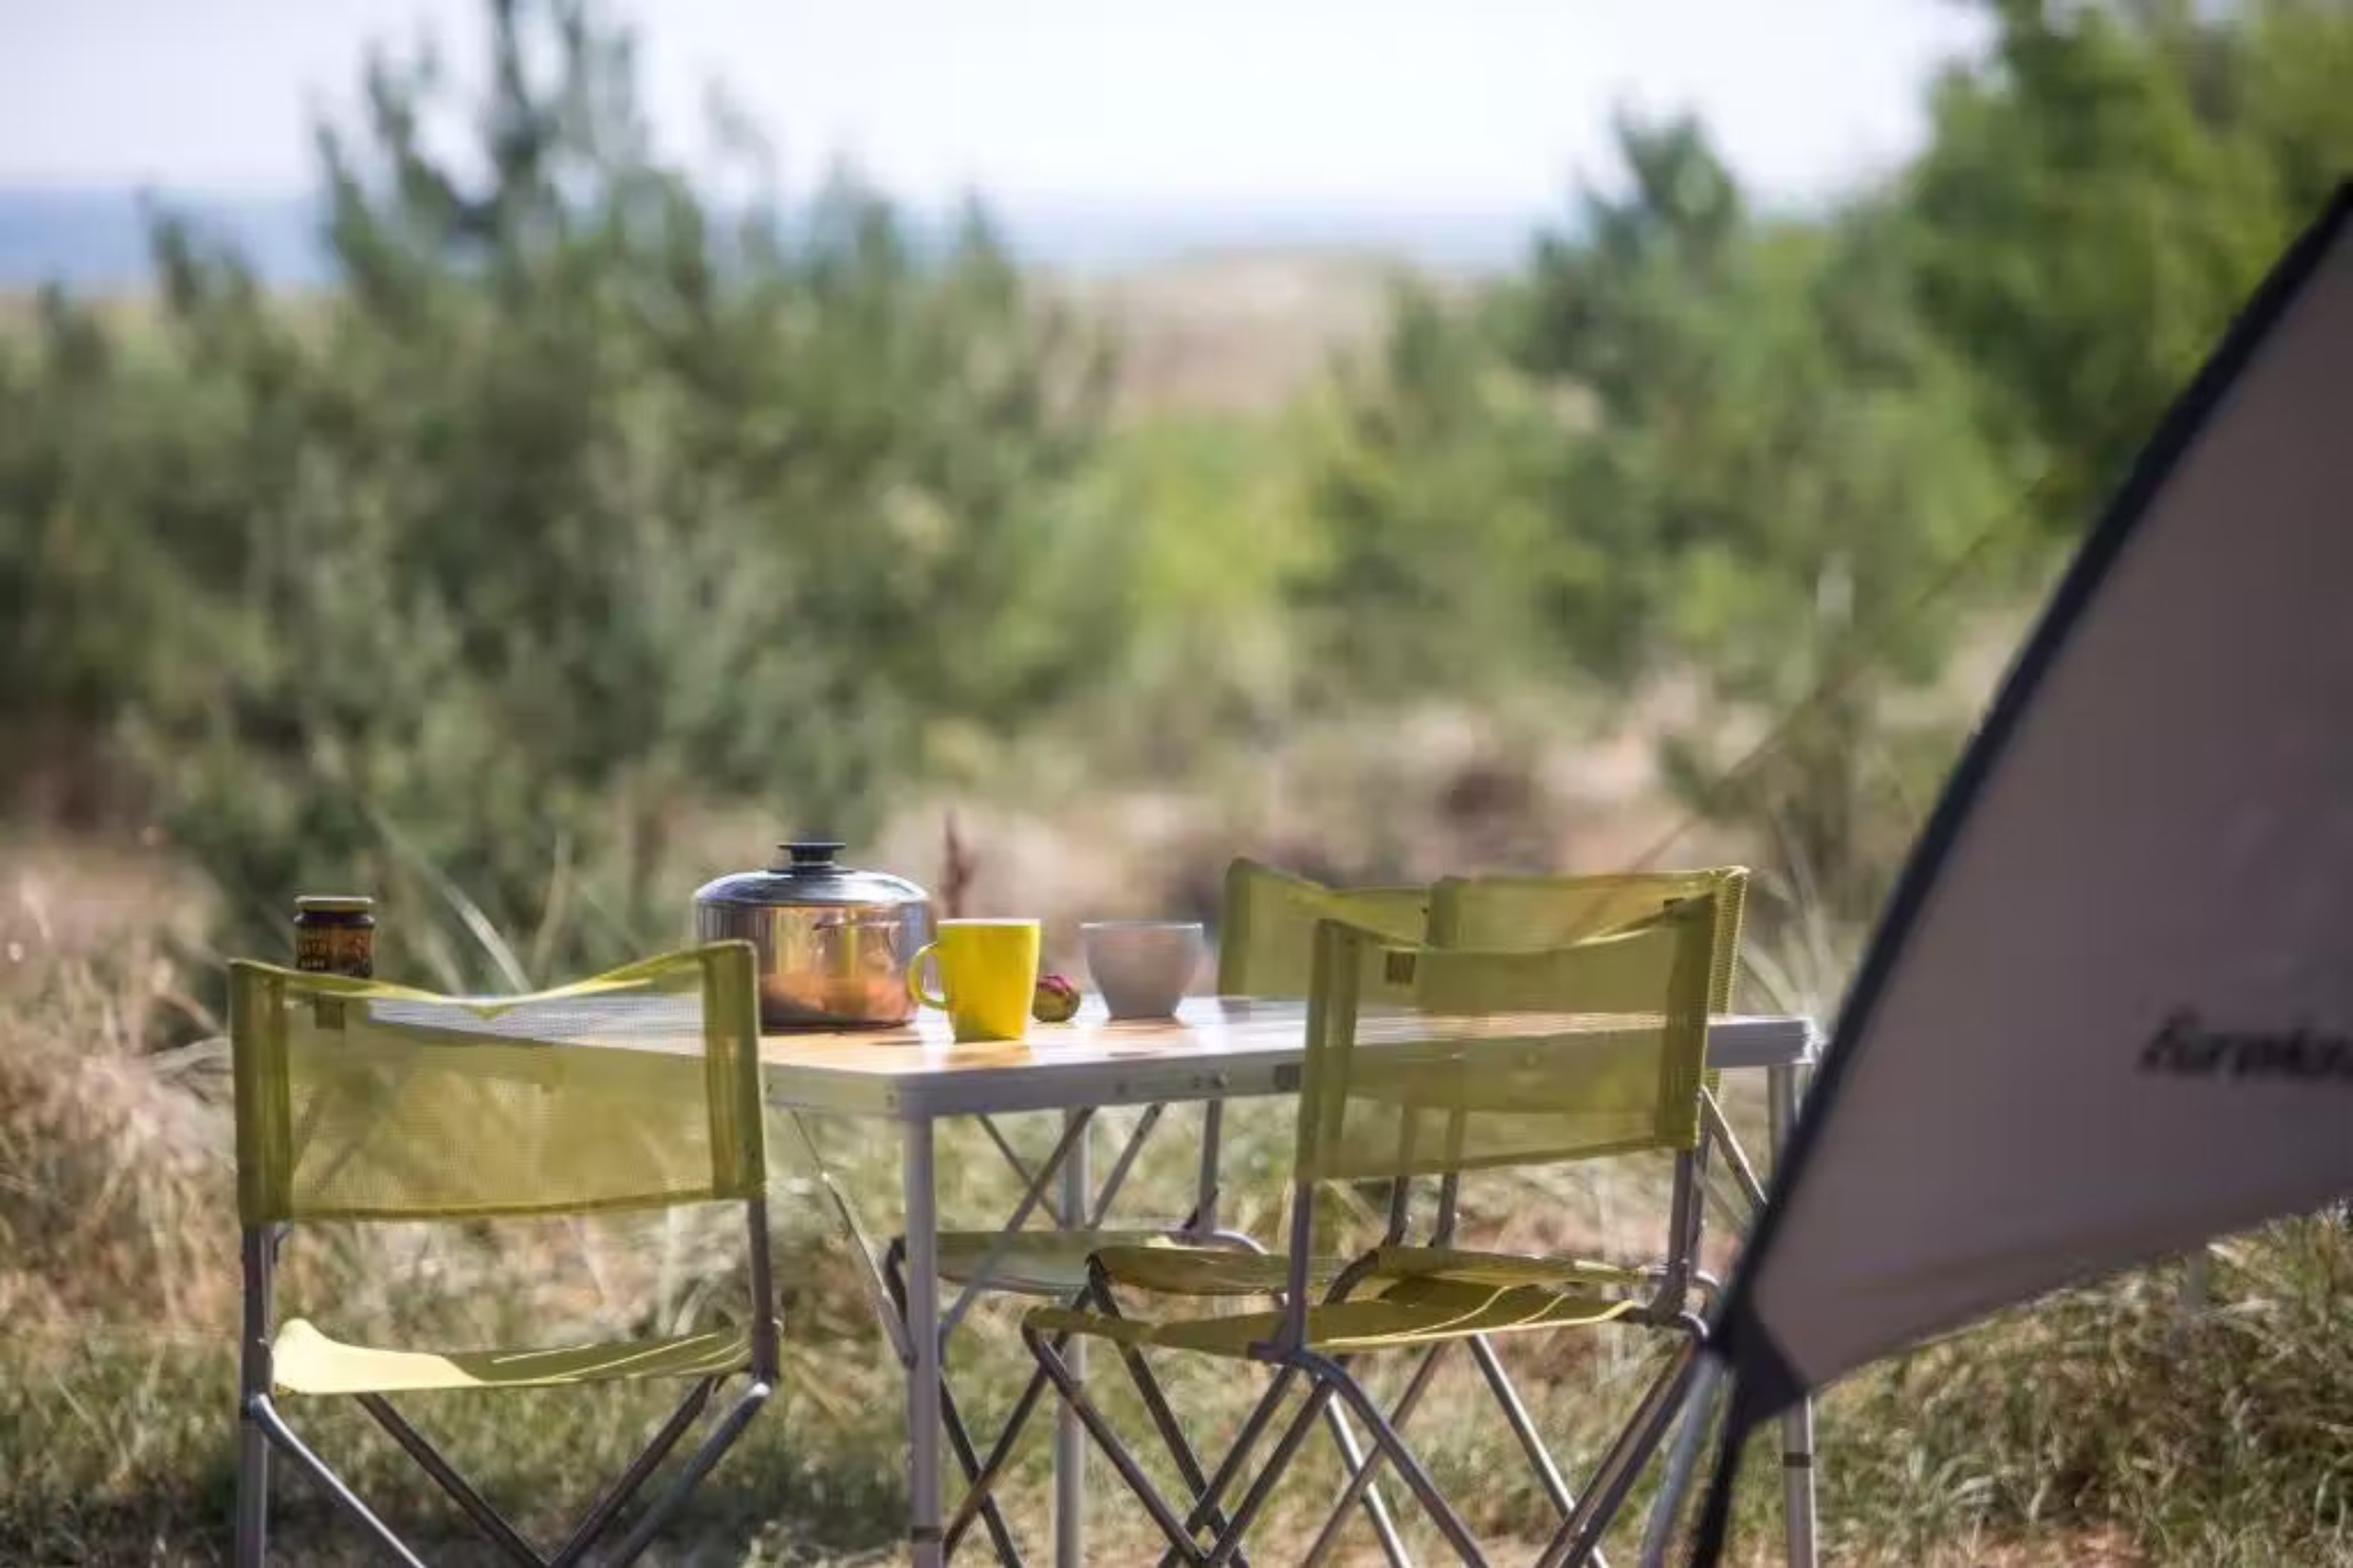 At Dueodde, there is a great opportunity to experience nature camping in the middle of Bornholm's countryside.